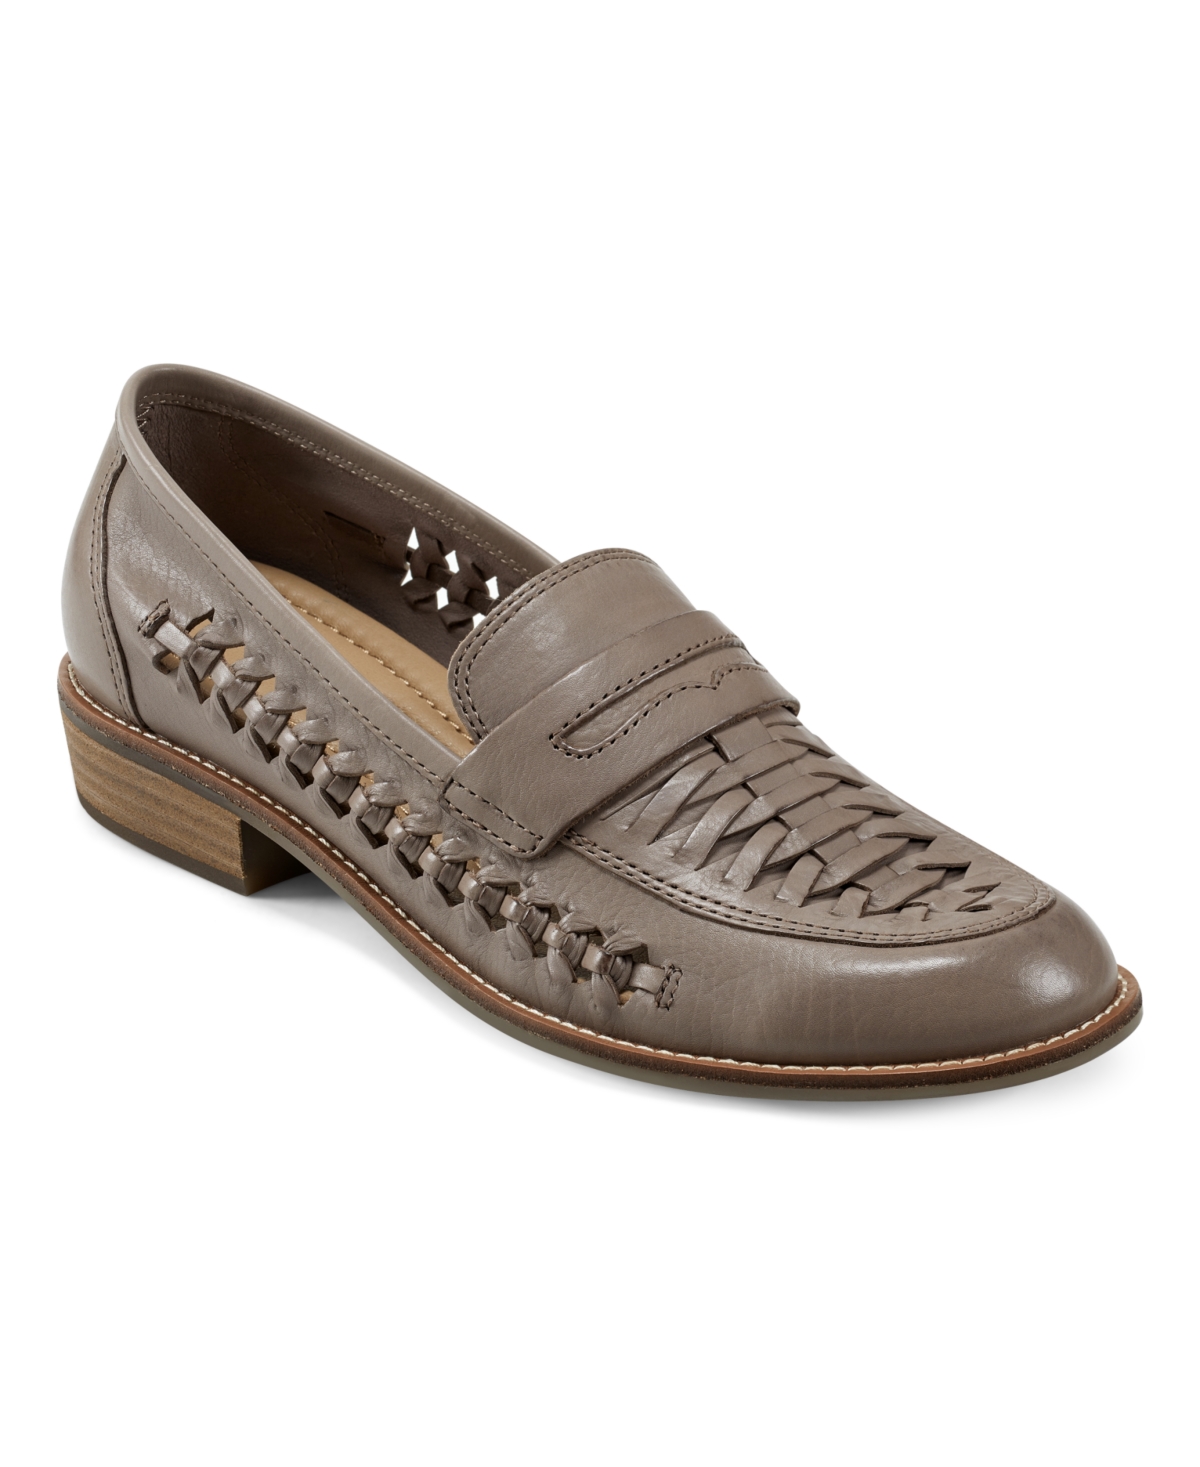 Earth Women's Ella Round Toe Slip-on Casual Flat Loafers In Gray Leather